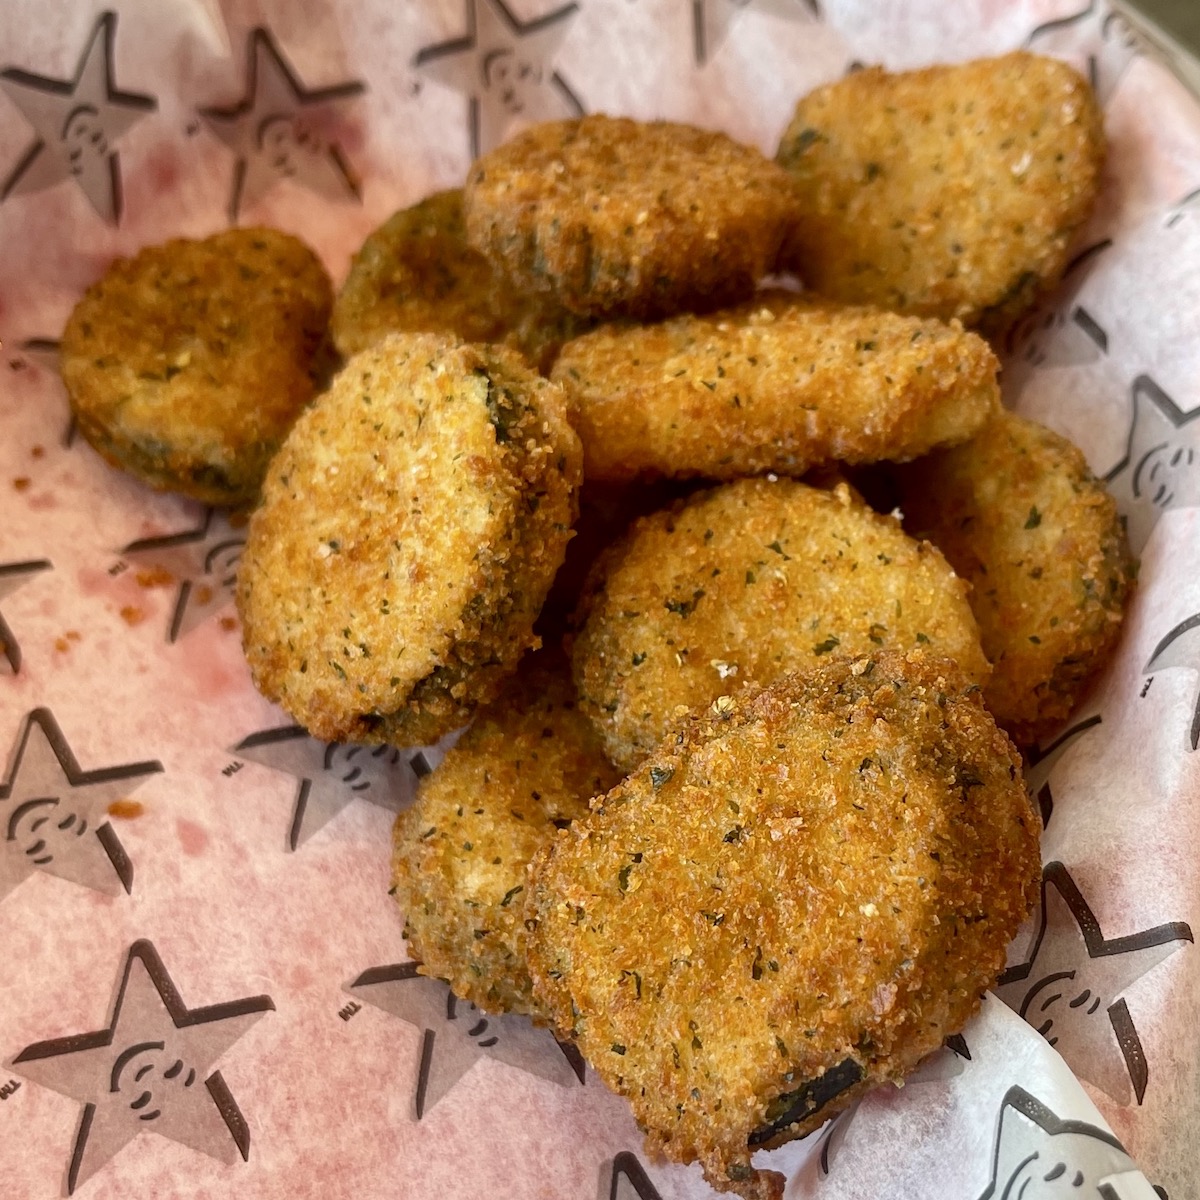 Fried Zucchini from Carl's Jr. in Doral, Florida